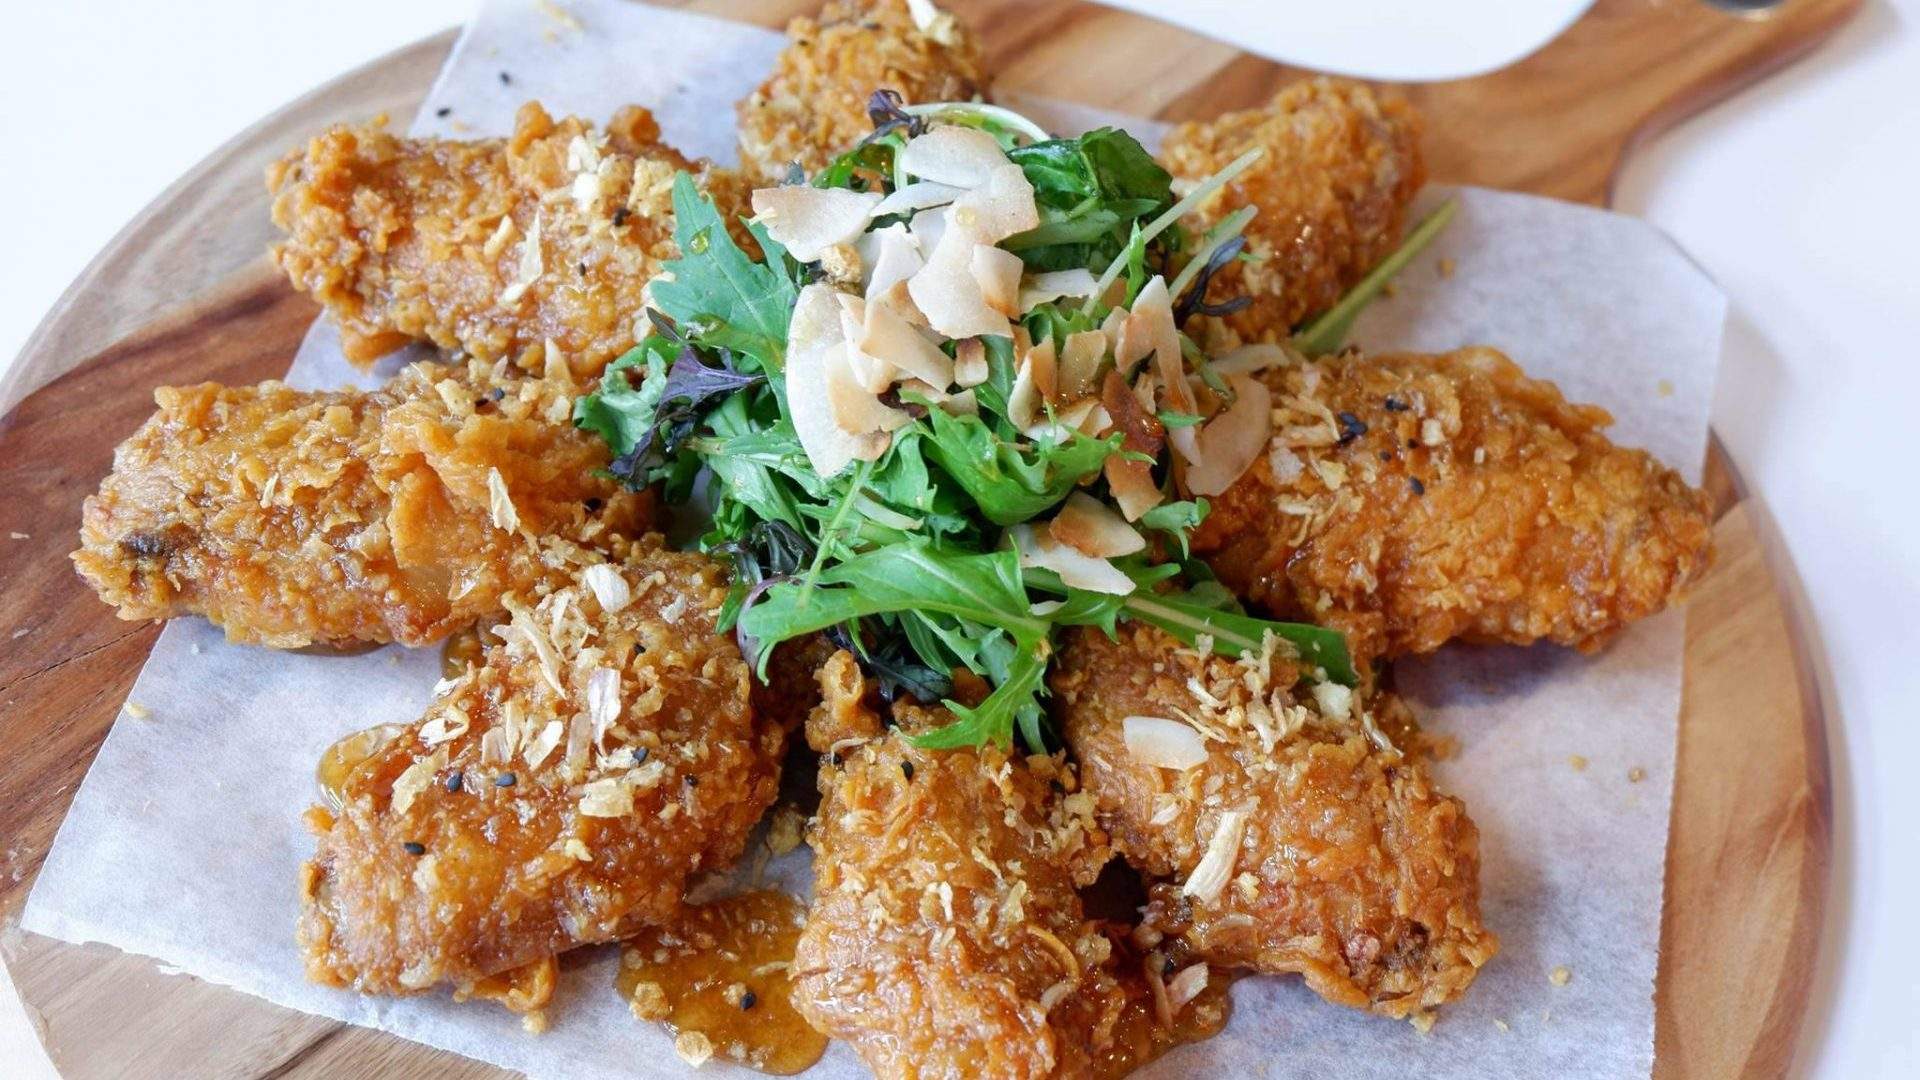 Meet Chicka, Kingsland's New Fried Chicken and Beer Joint